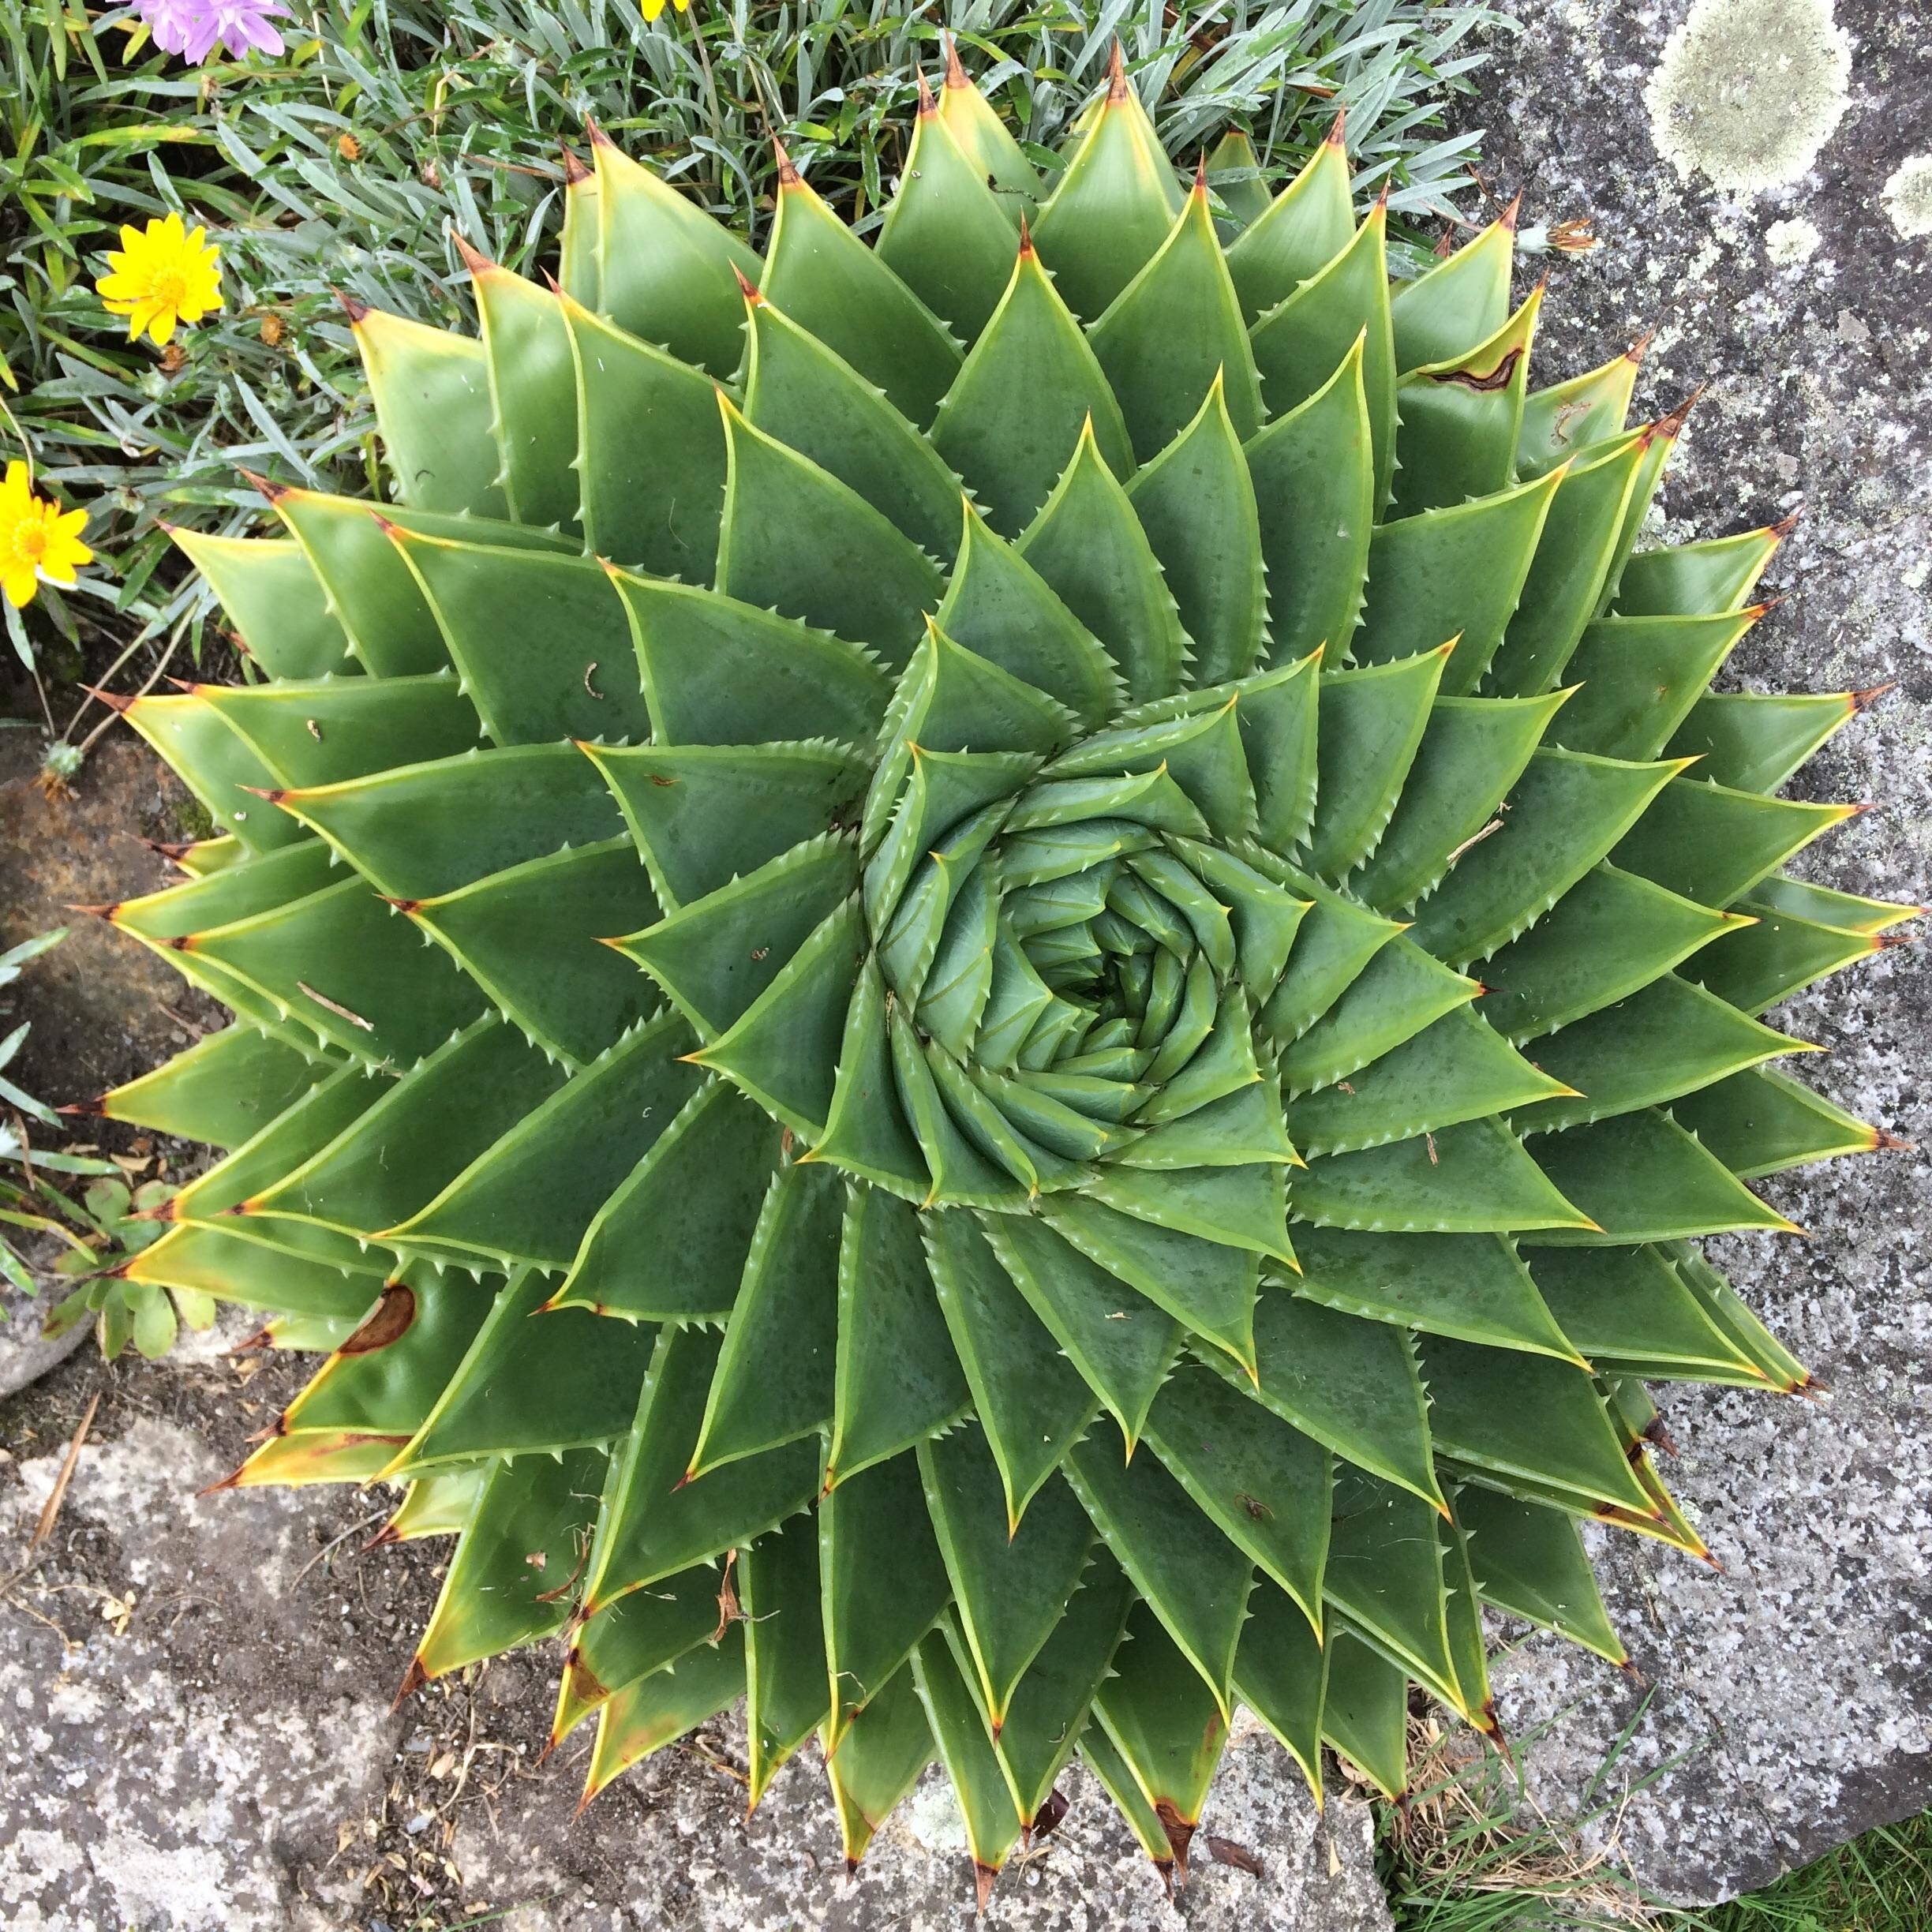 An aloe plant in the shape of a spiral